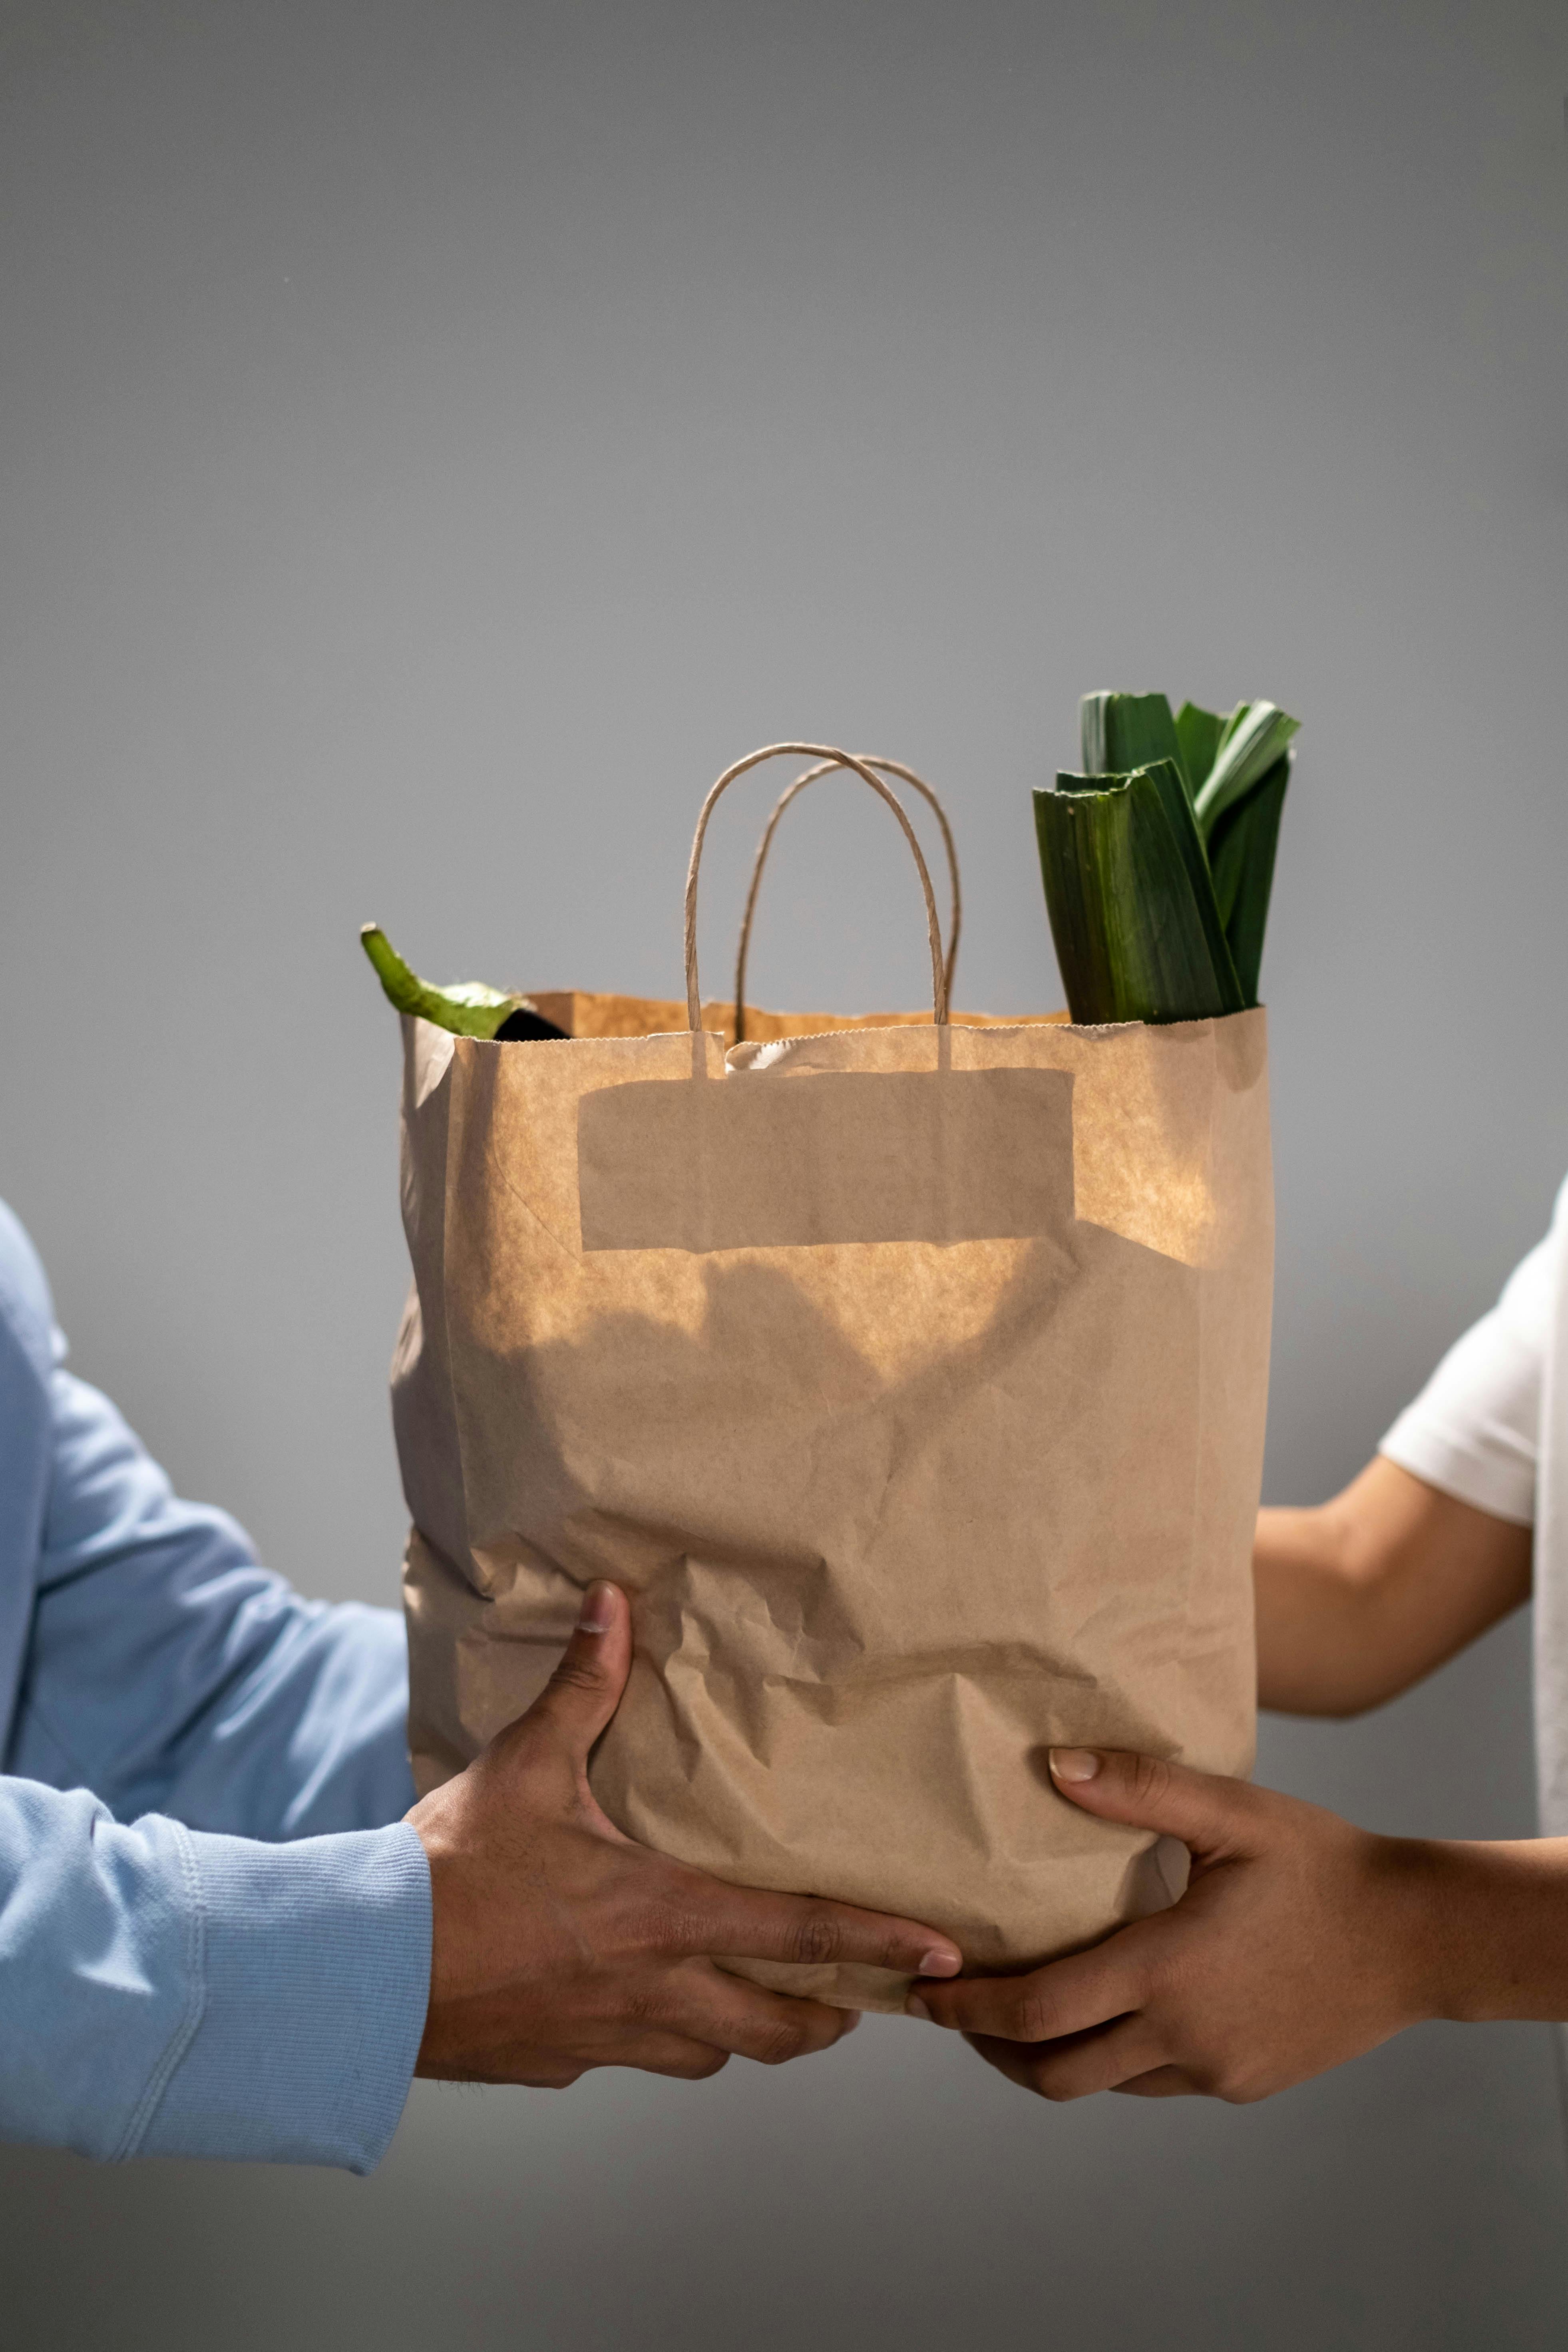 A Person Holding Peony Flowers in a Brown Paper Bag · Free Stock Photo